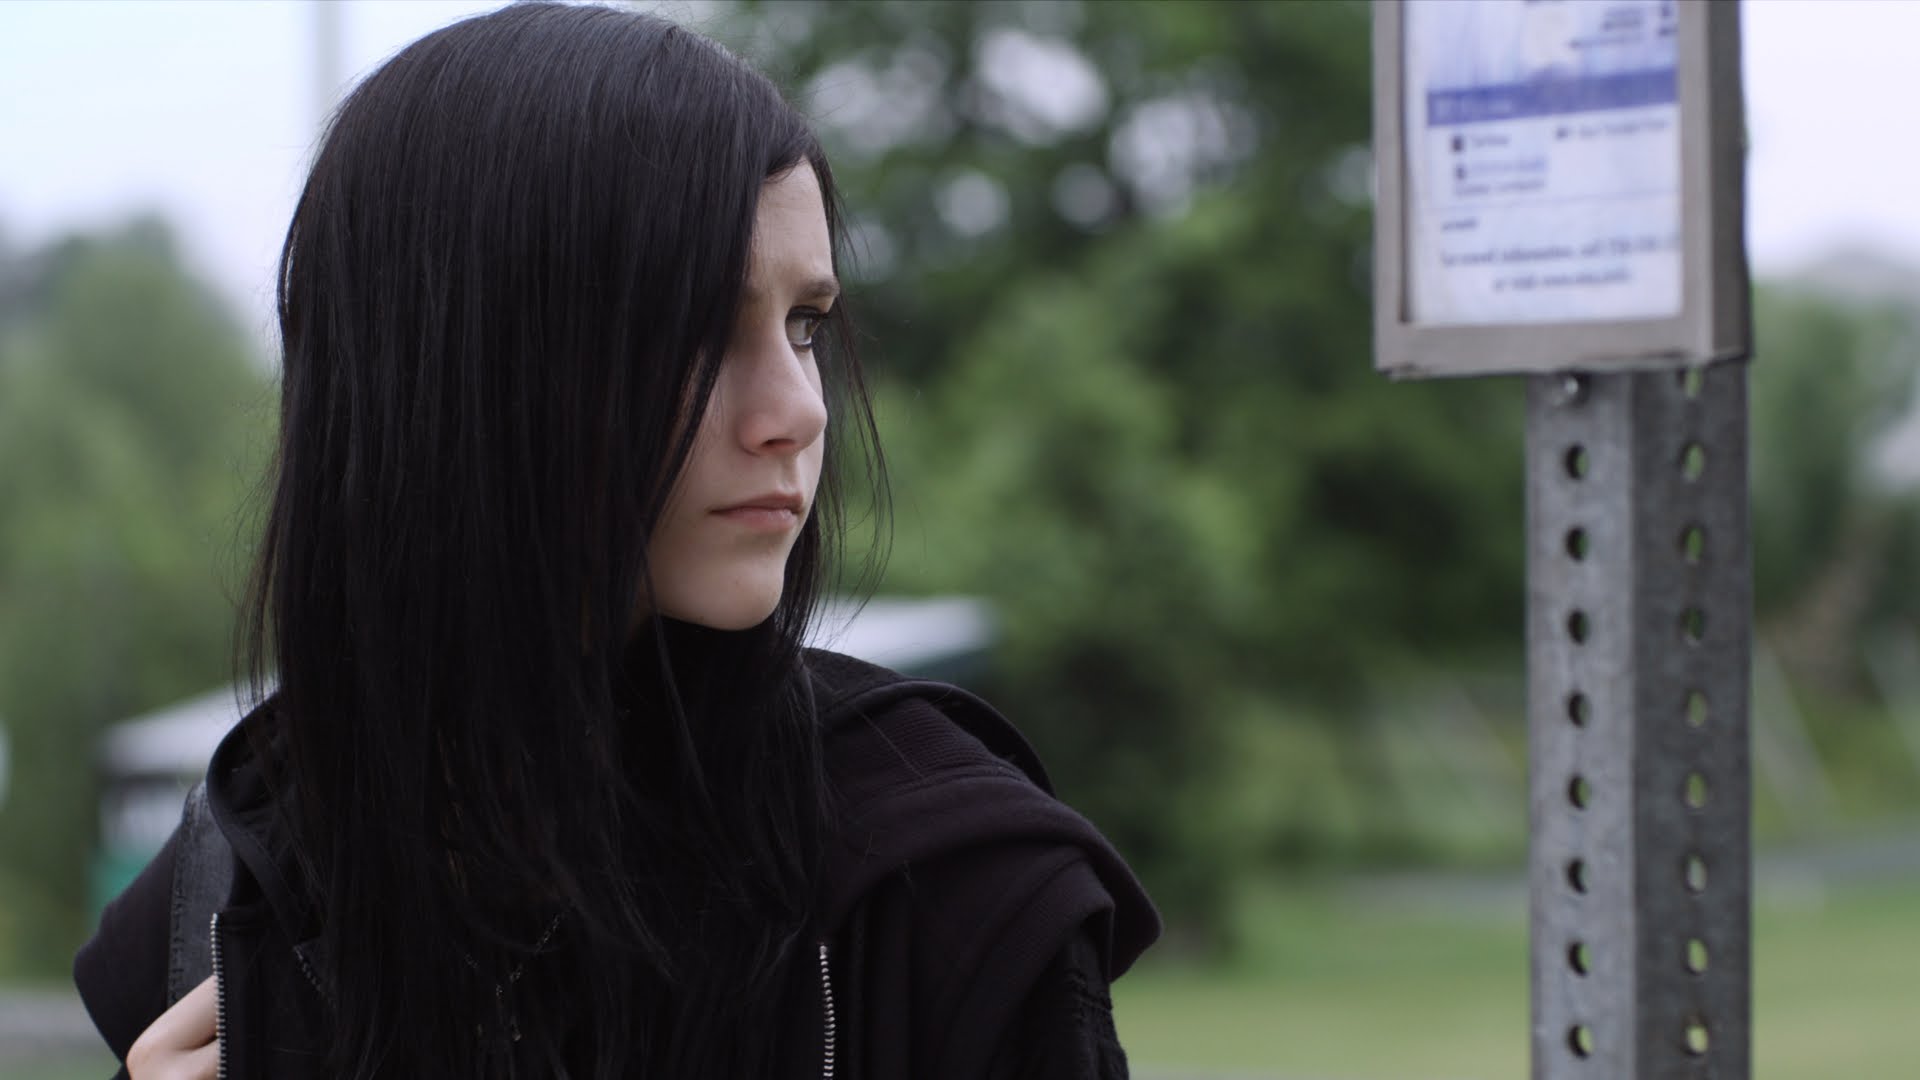 Cutest Goth Ad Ever? It's Super Bleak, but You'll Be Smiling by